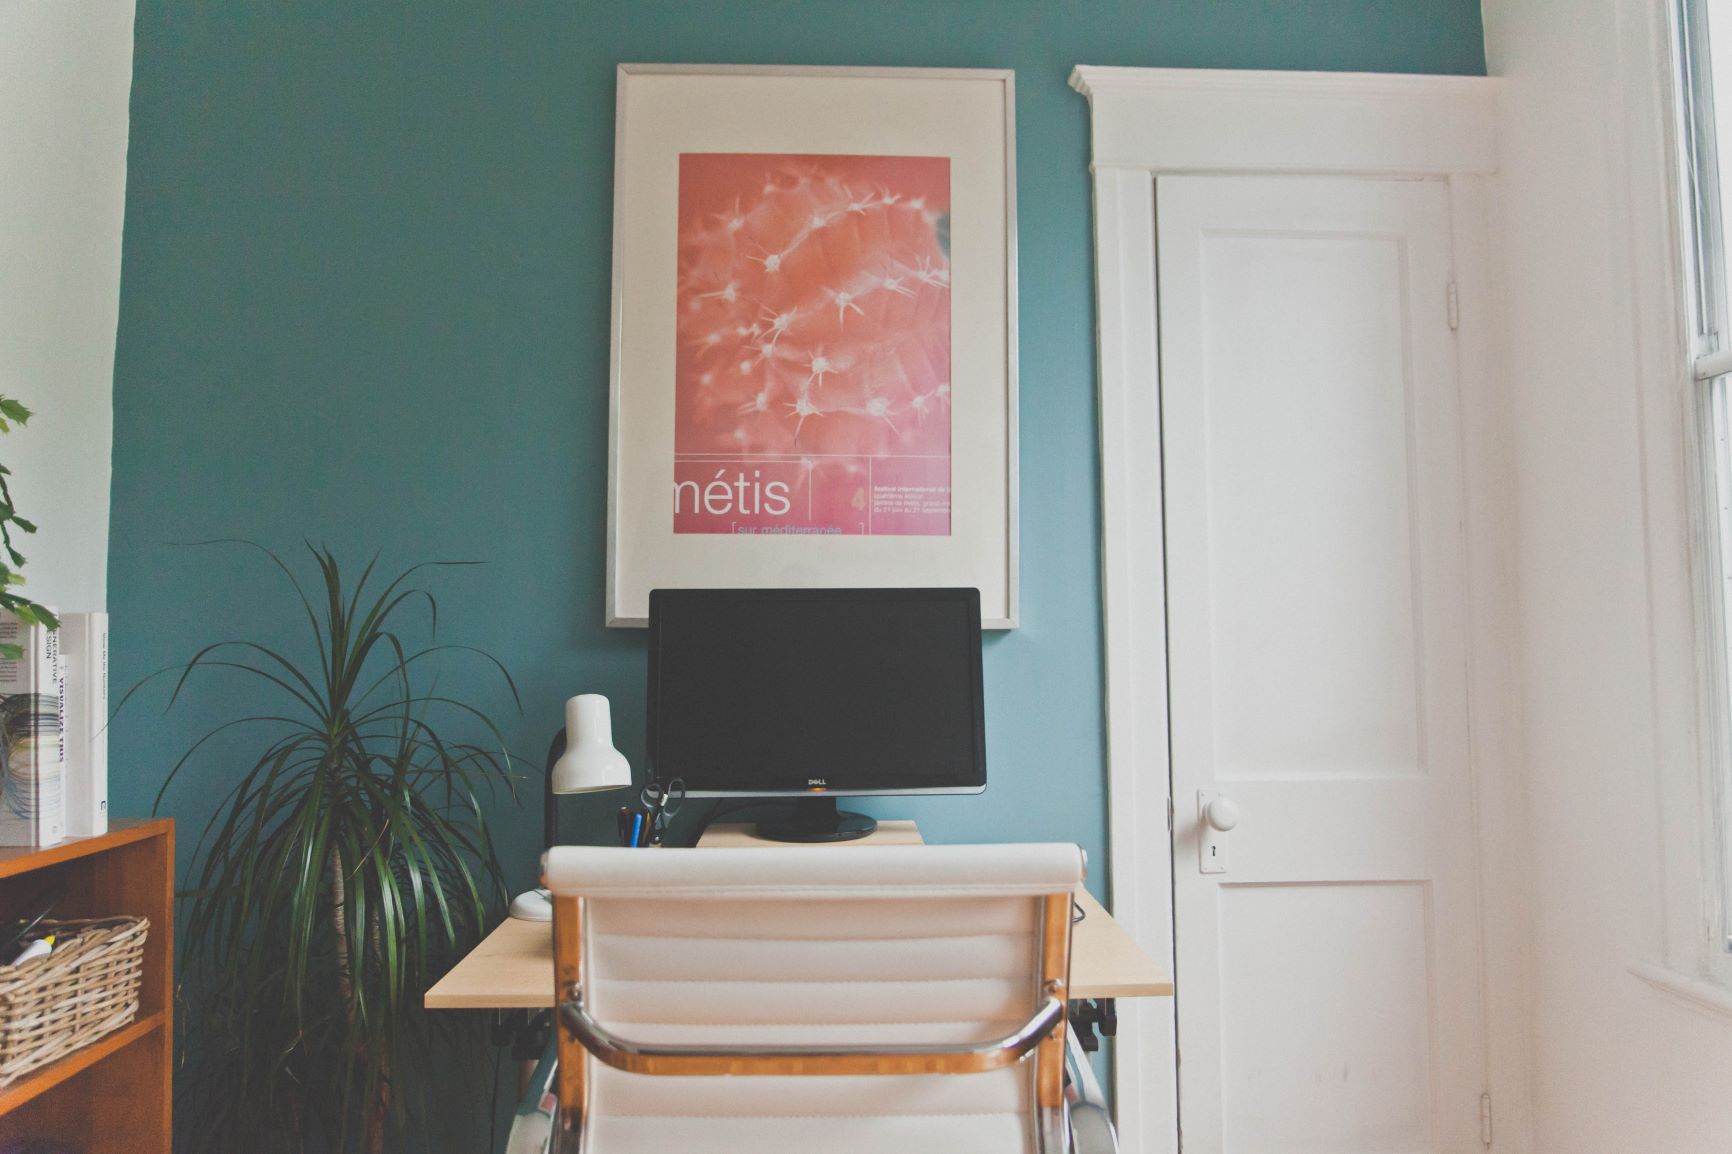 WORKING FROM HOME – HOW TO STAY PRODUCTIVE